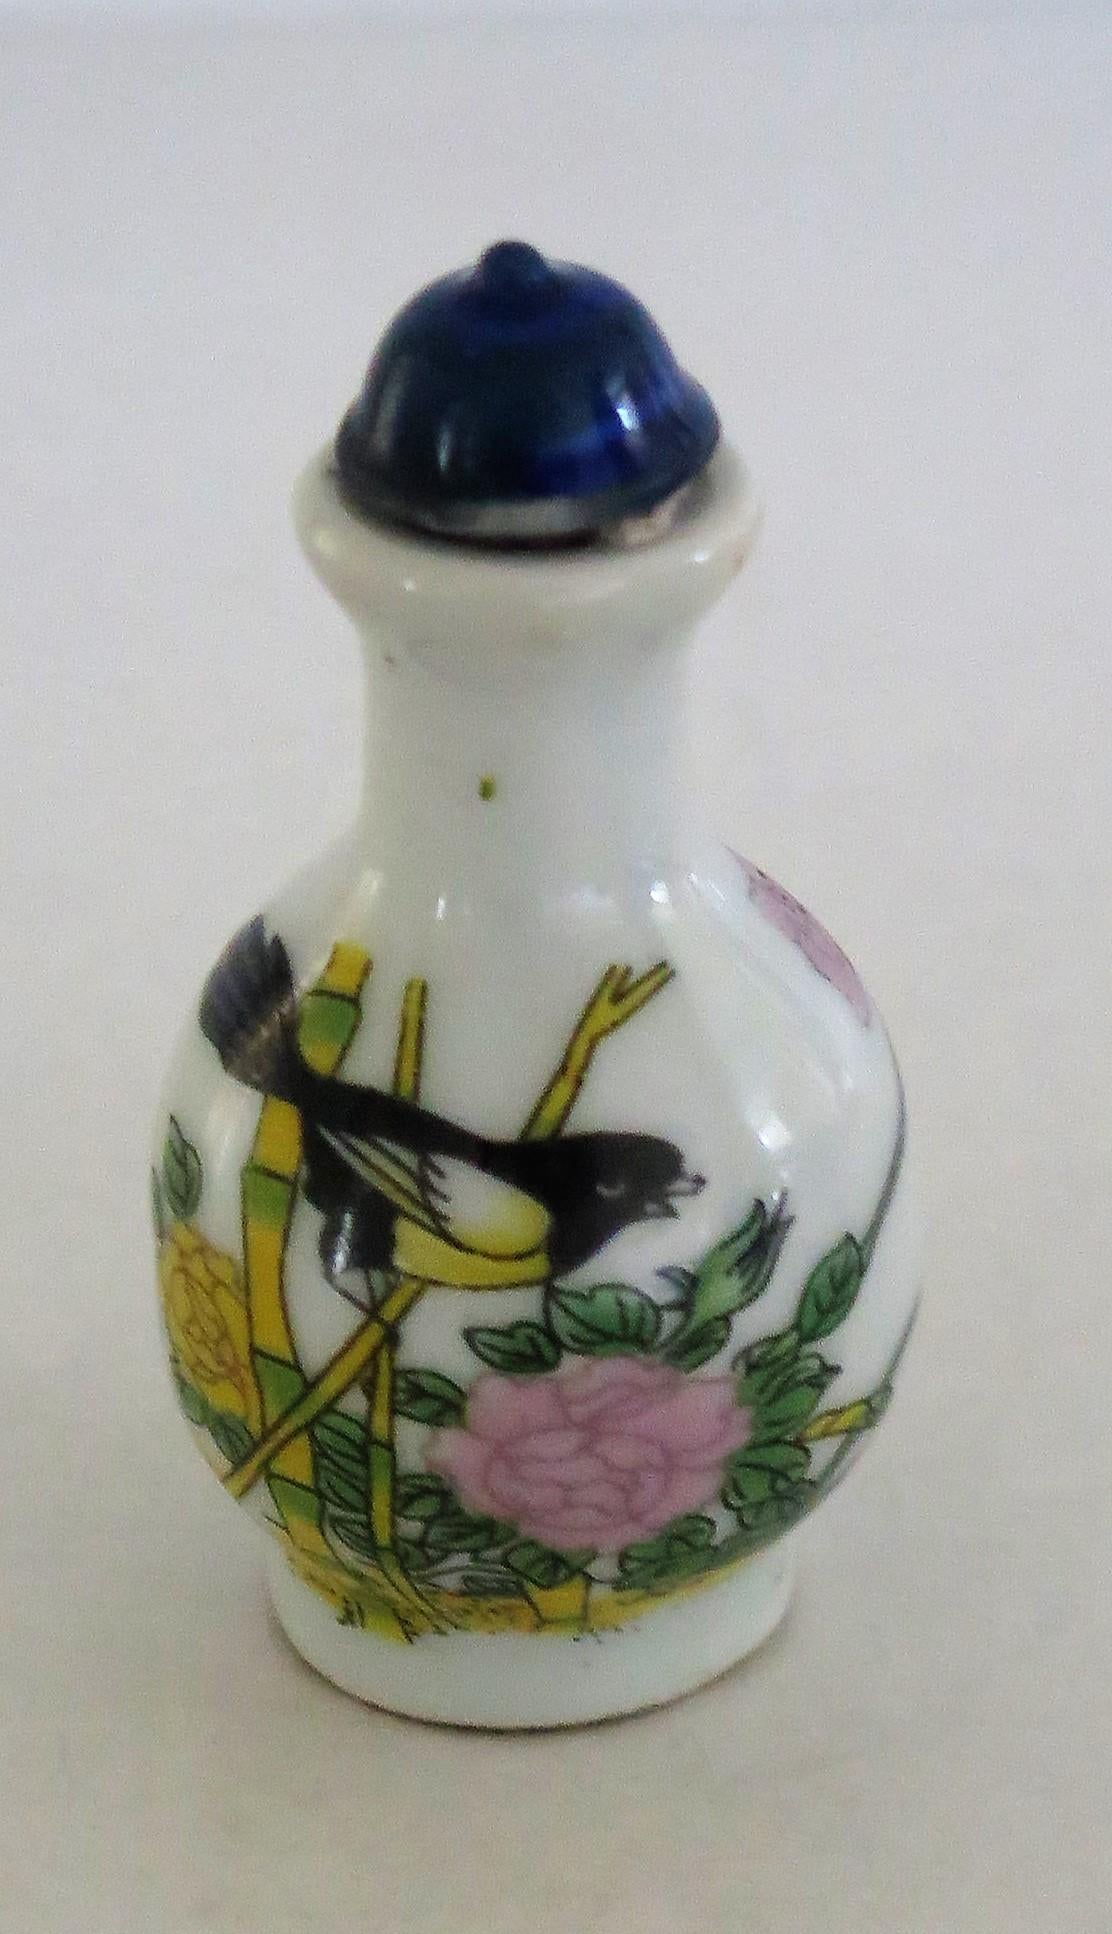 This is a good quality, hand-painted, Chinese Snuff Bottle made from porcelain, circa 1930. 

The bottle is well potted and has a footed baluster shape leading to a narrow neck, with a matching cone shaped stopper. 

The main decoration depicts